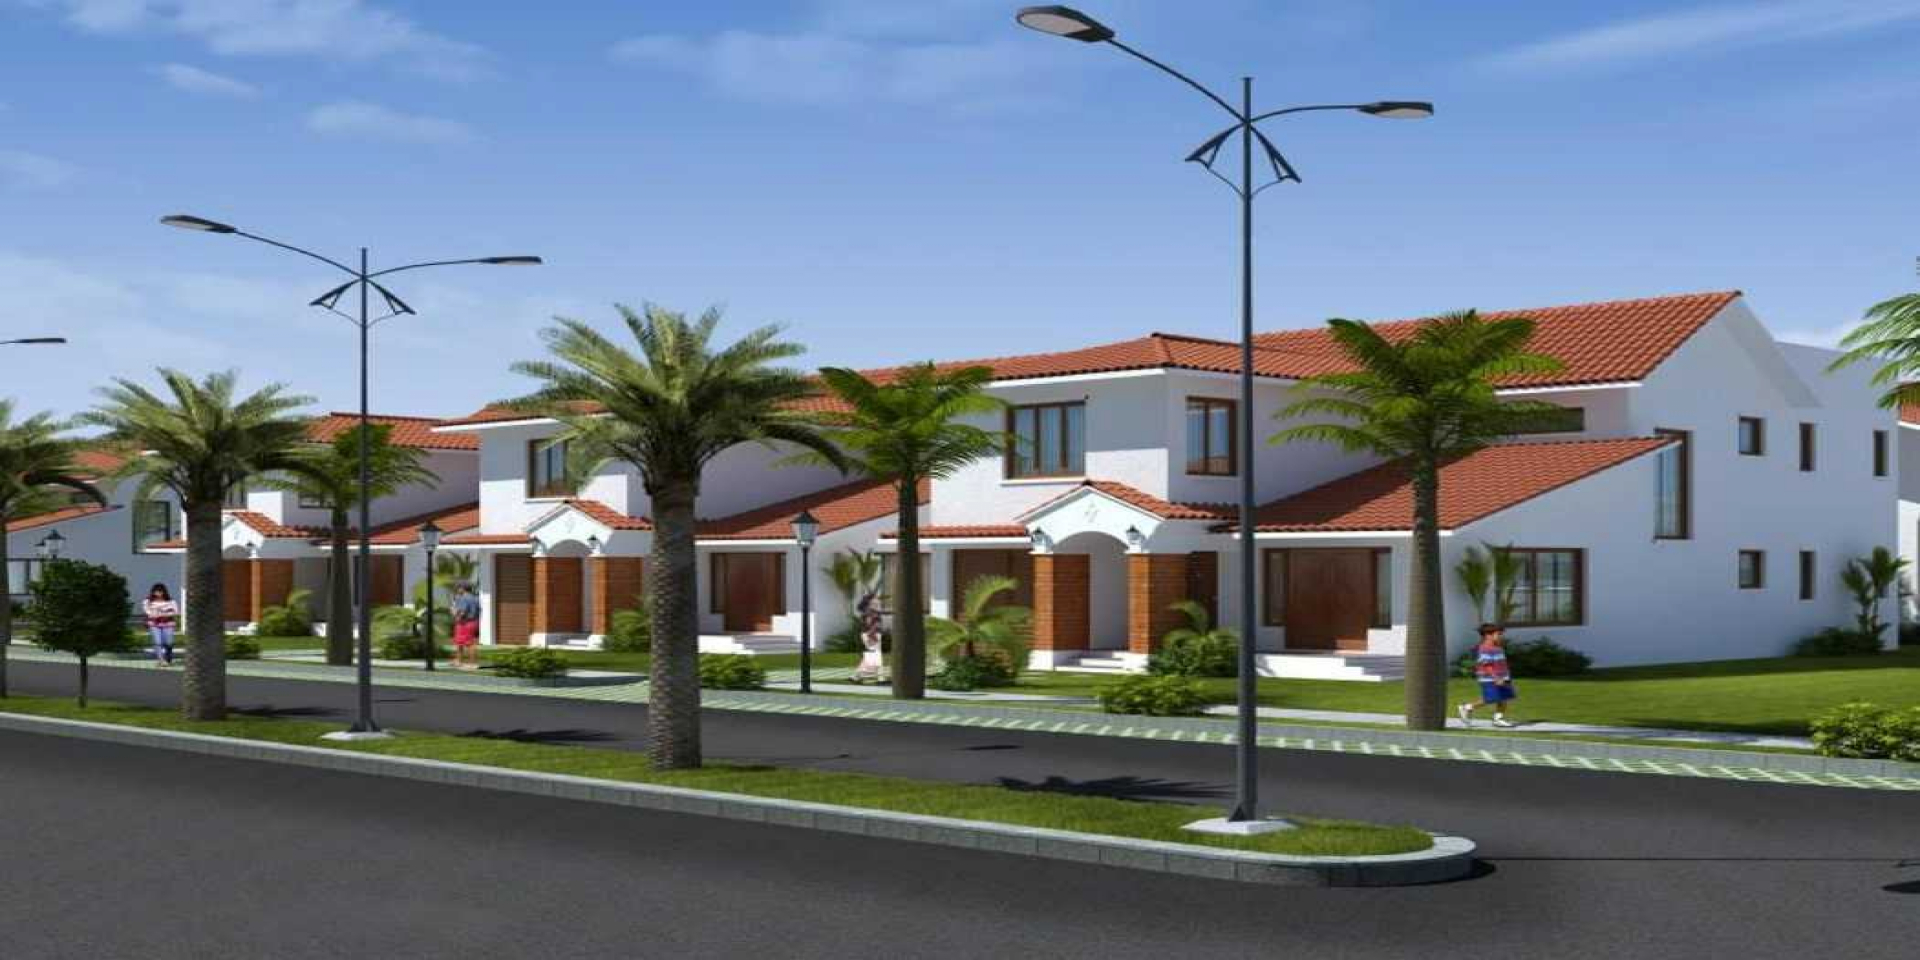 3, 4, 5 BHK House for sale in Electronic City